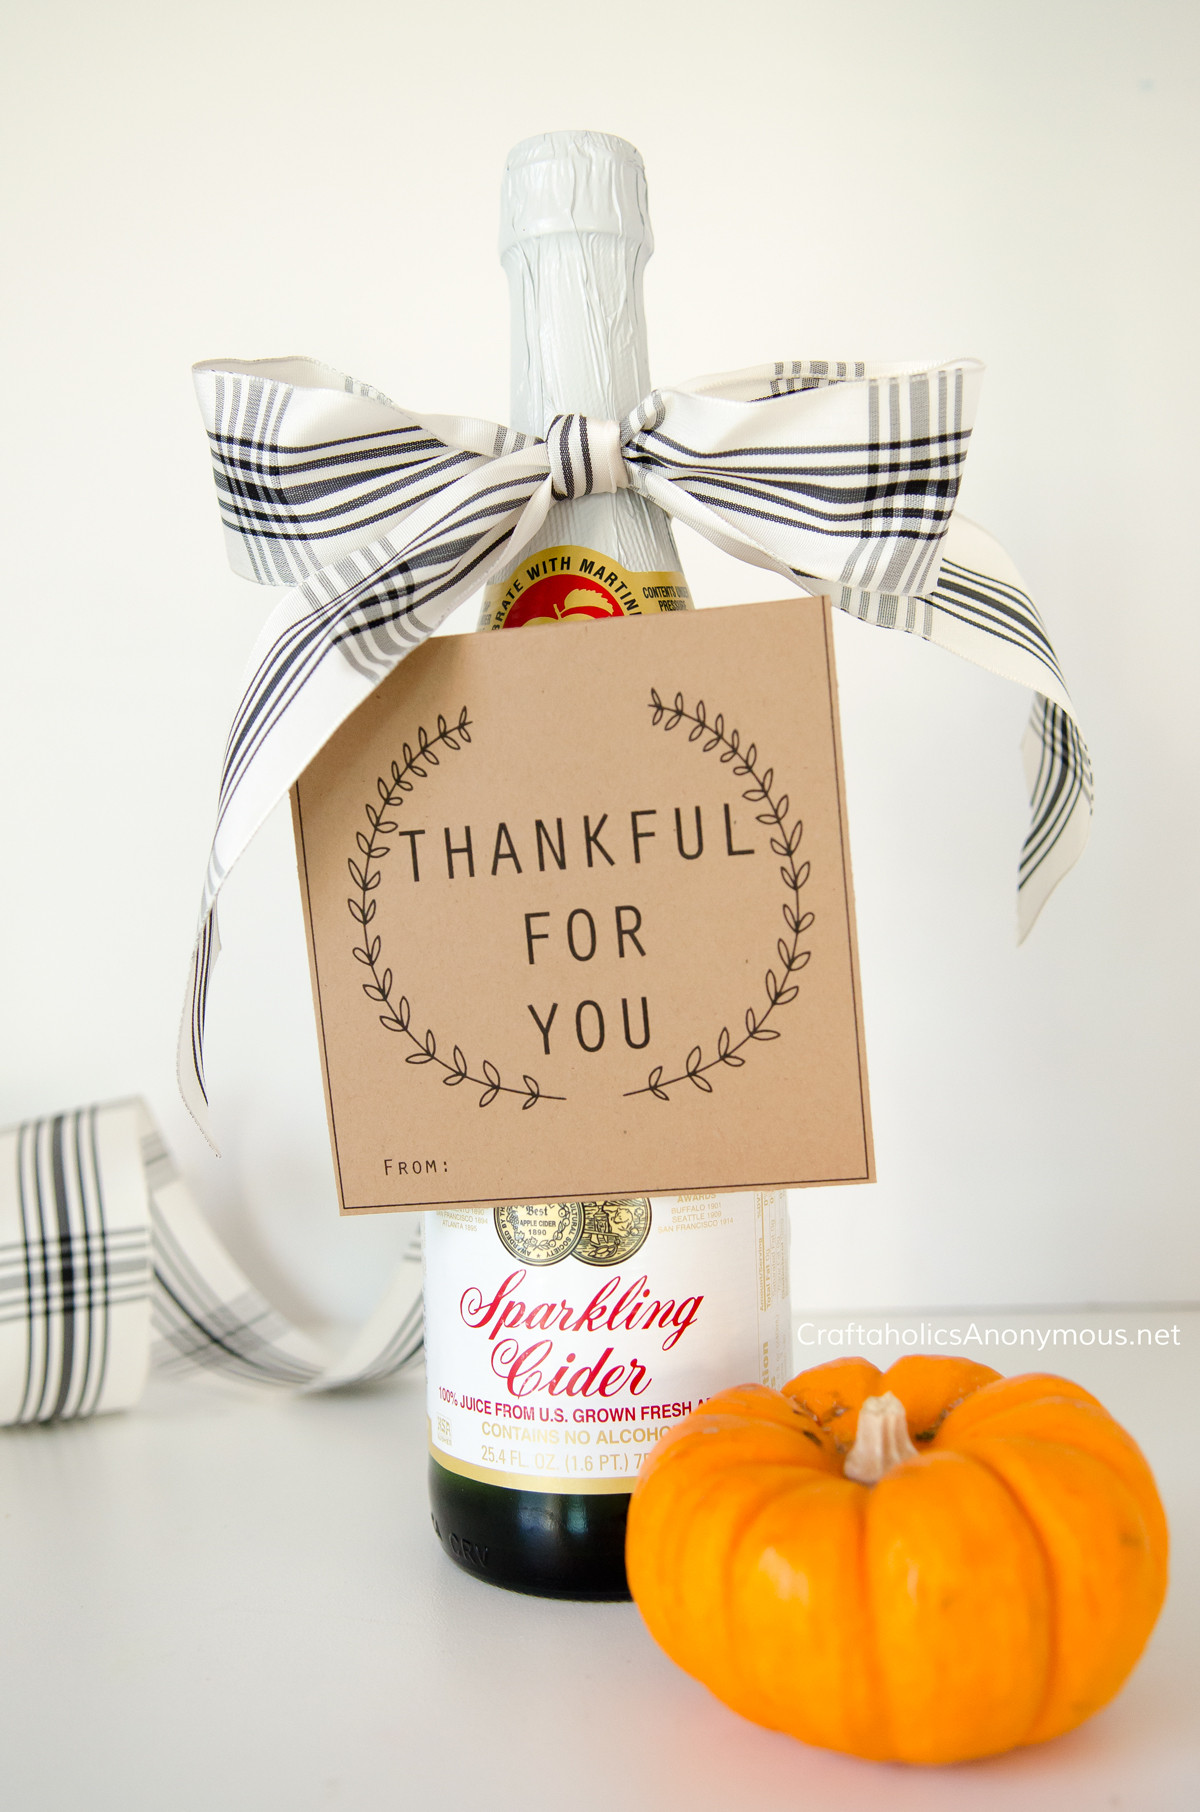 Thanksgiving Gift Ideas For The Family
 Craftaholics Anonymous